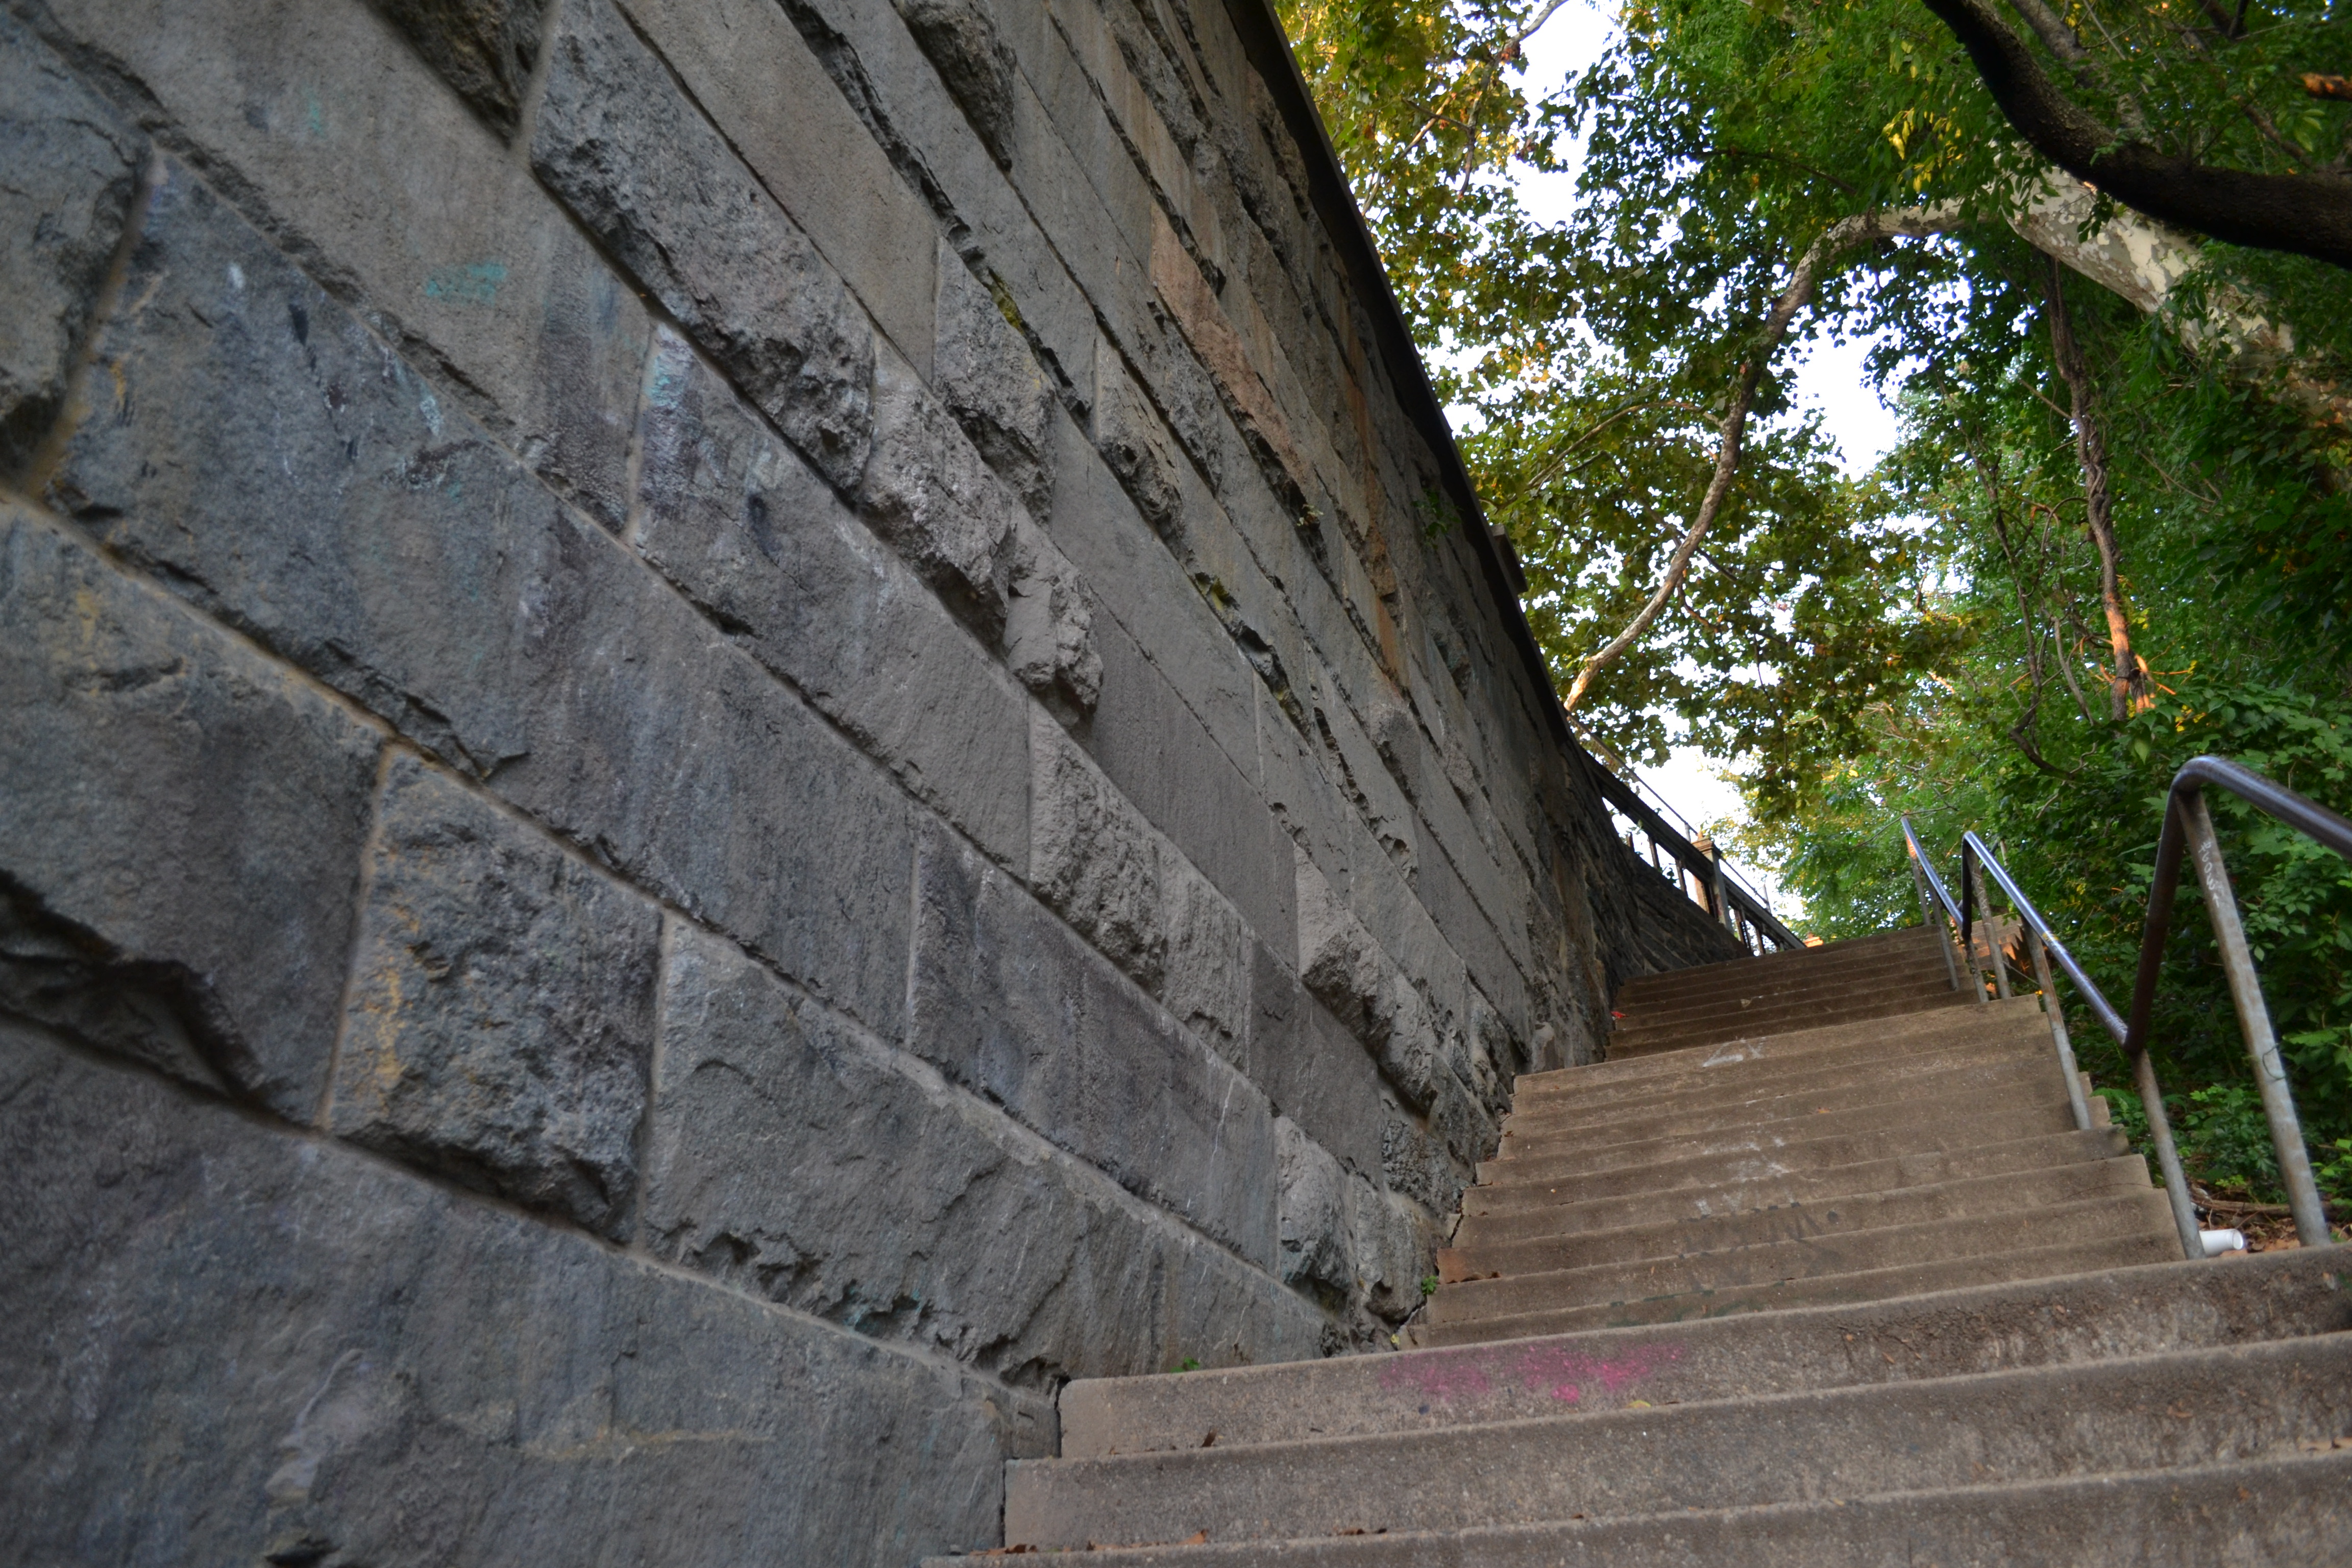 Stairs along the side of the bridge used to lead to a second deck intended for pedestrian travel